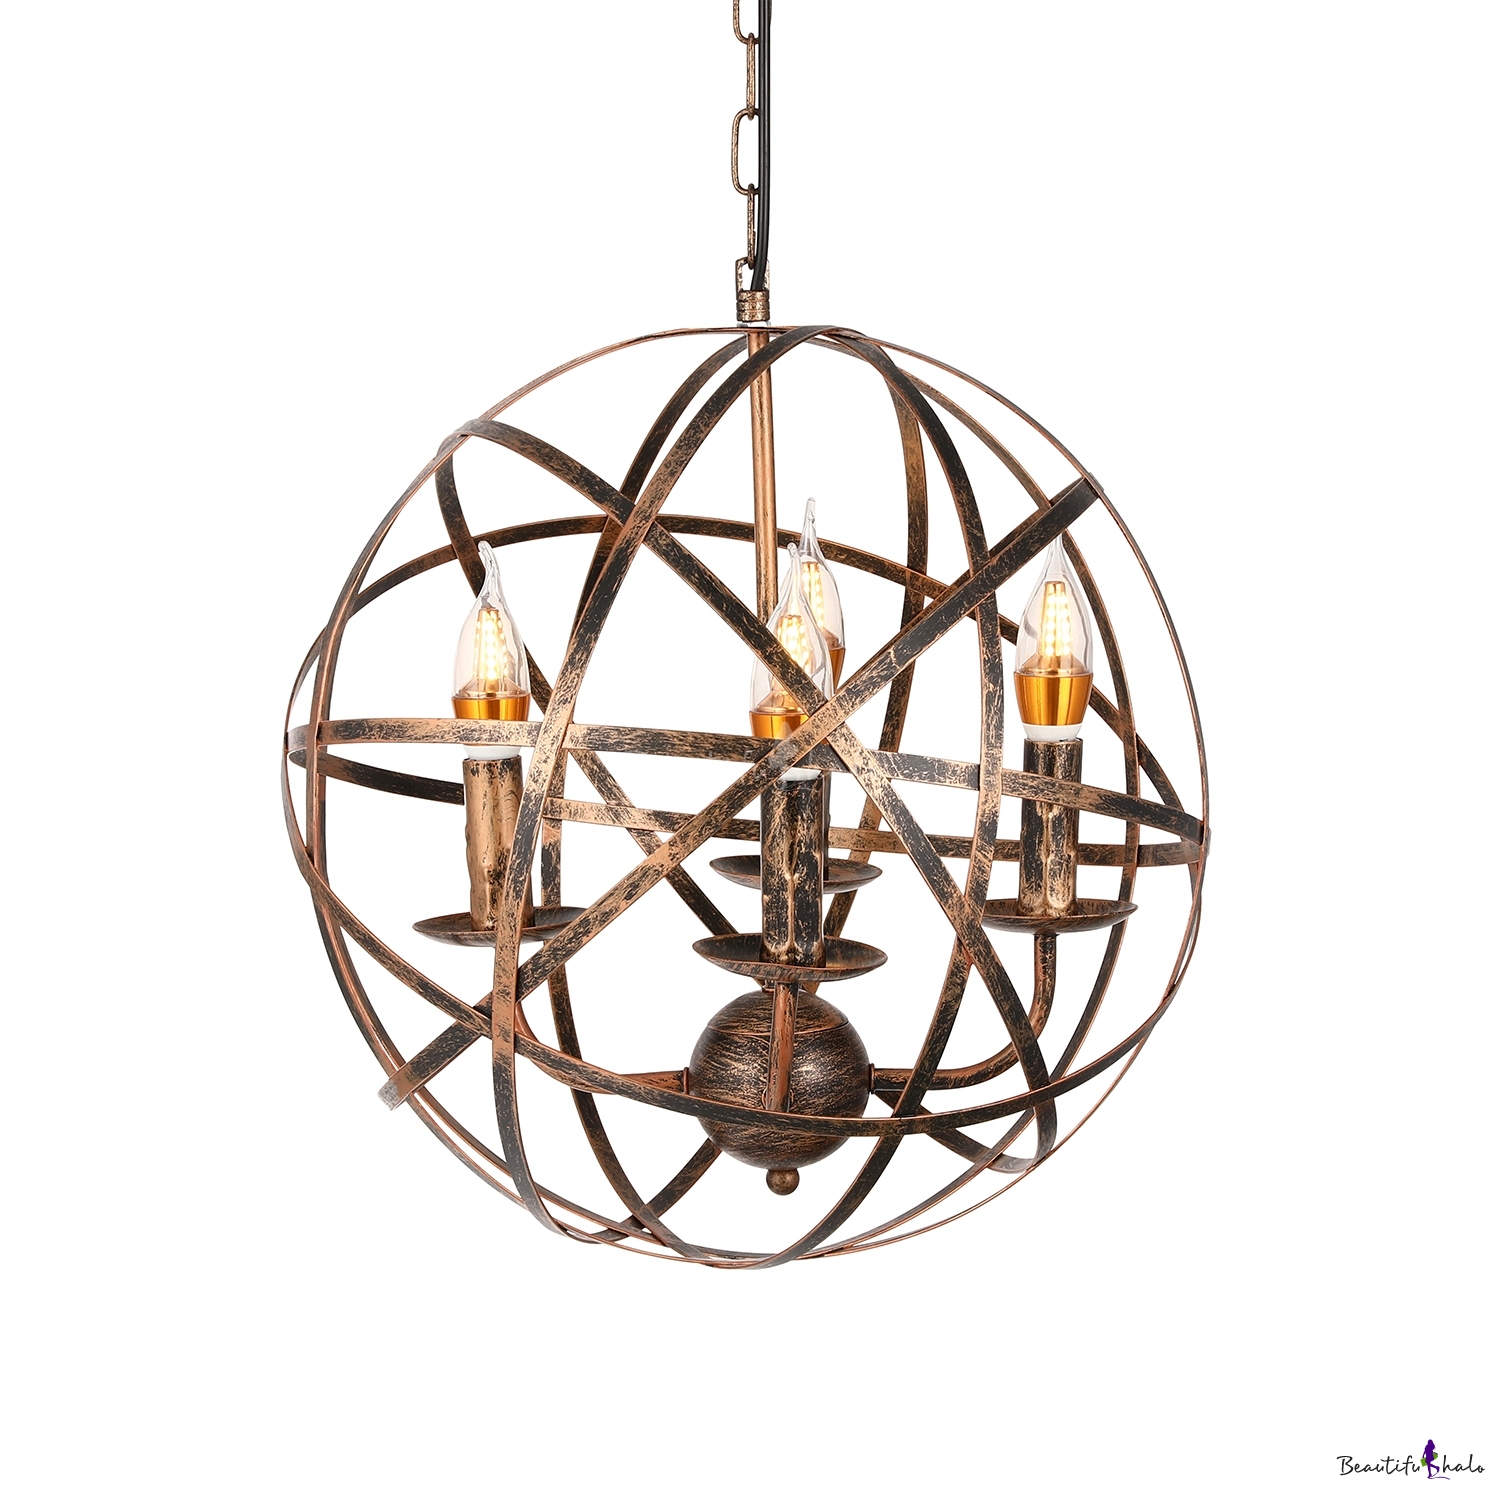 Aged Brass 4 Light Candle Chandelier with Globe Shade in Rustic Iron ...